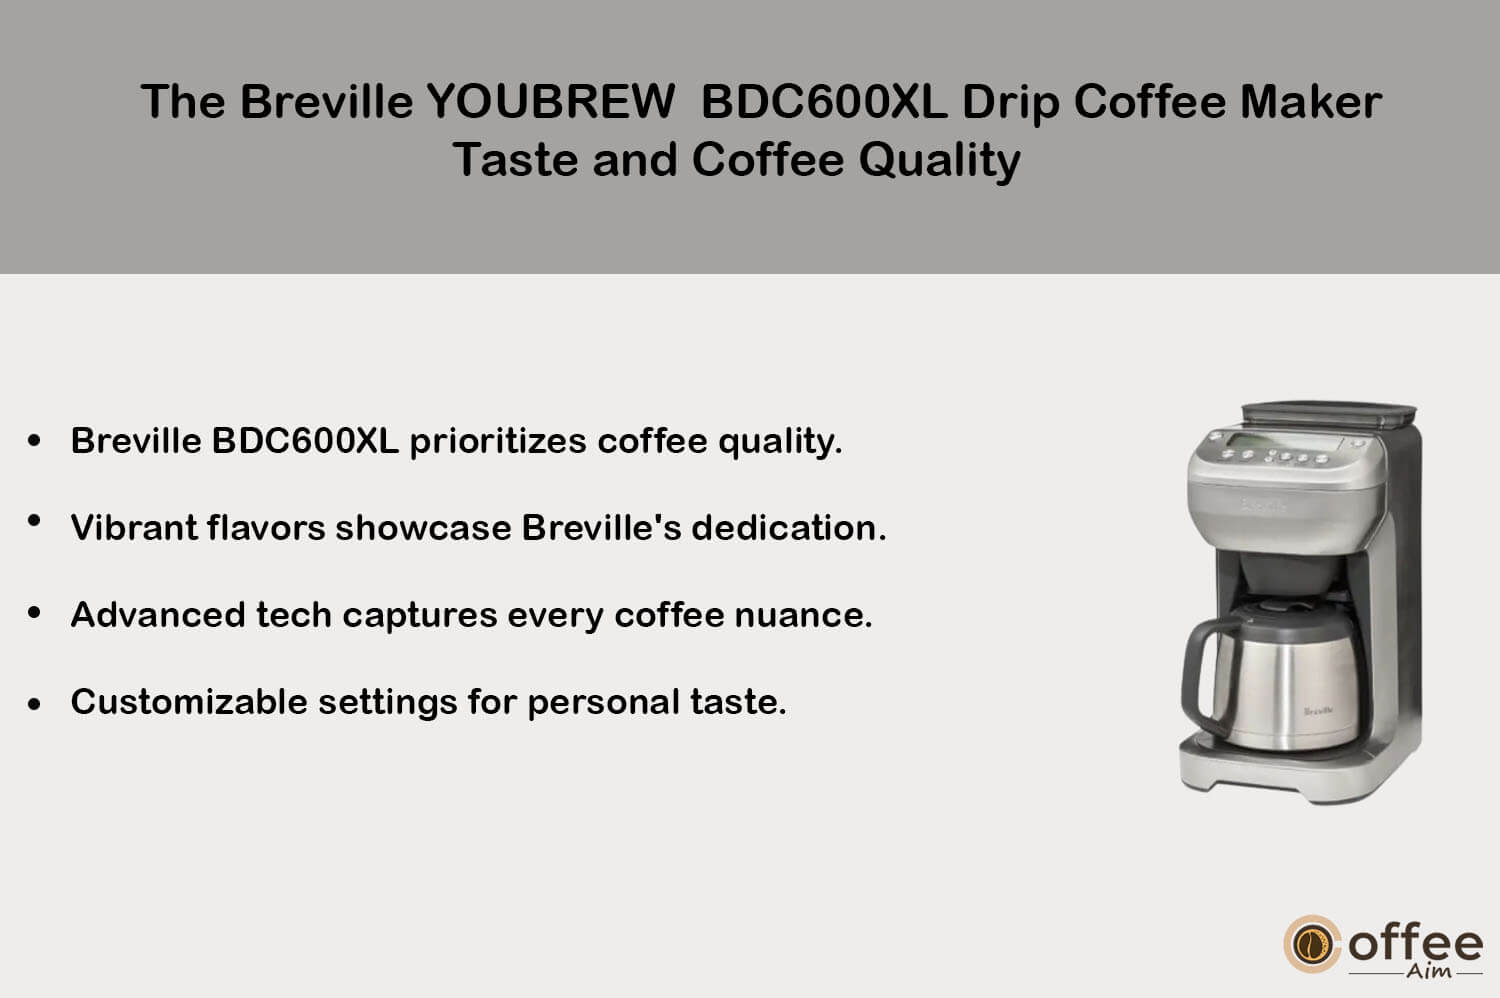 This graphic illustrates the flavor and coffee excellence of "The Breville YOUBREW BDC600XL Drip Coffee Maker" for the review article titled "The Breville YOUBREW BDC600XL Drip Coffee Maker Analysis."